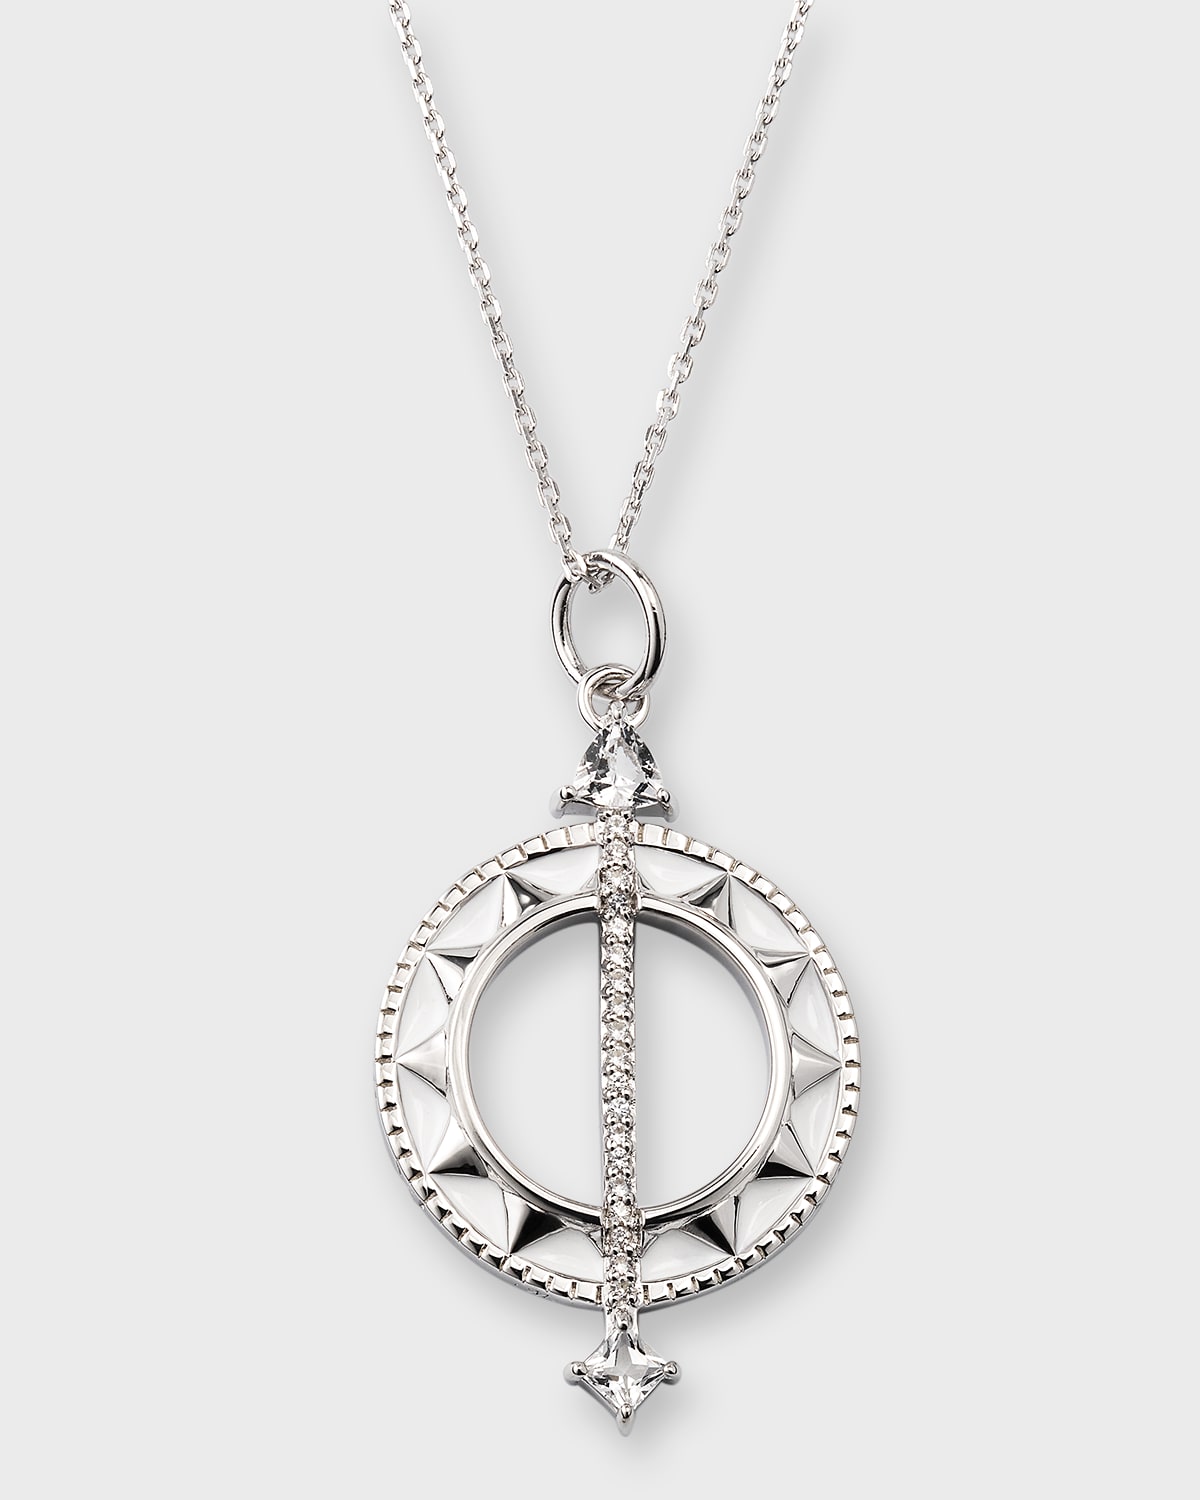 Sterling Silver Sundial Charm Necklace with White Enamel